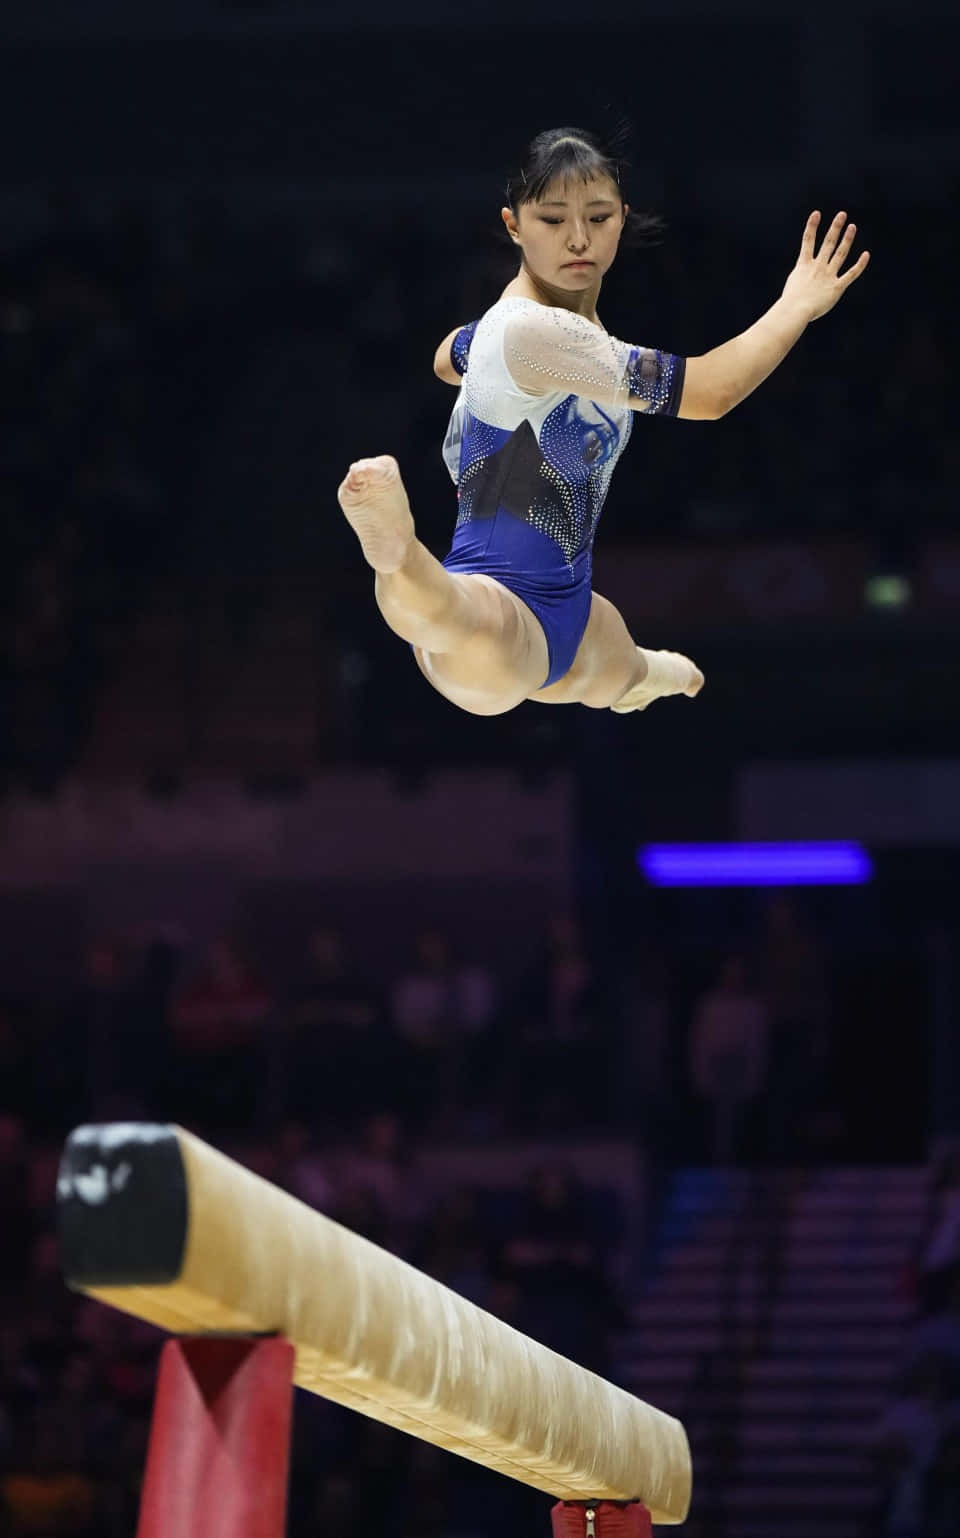 An Athlete in Action During a Gymnastics Routine